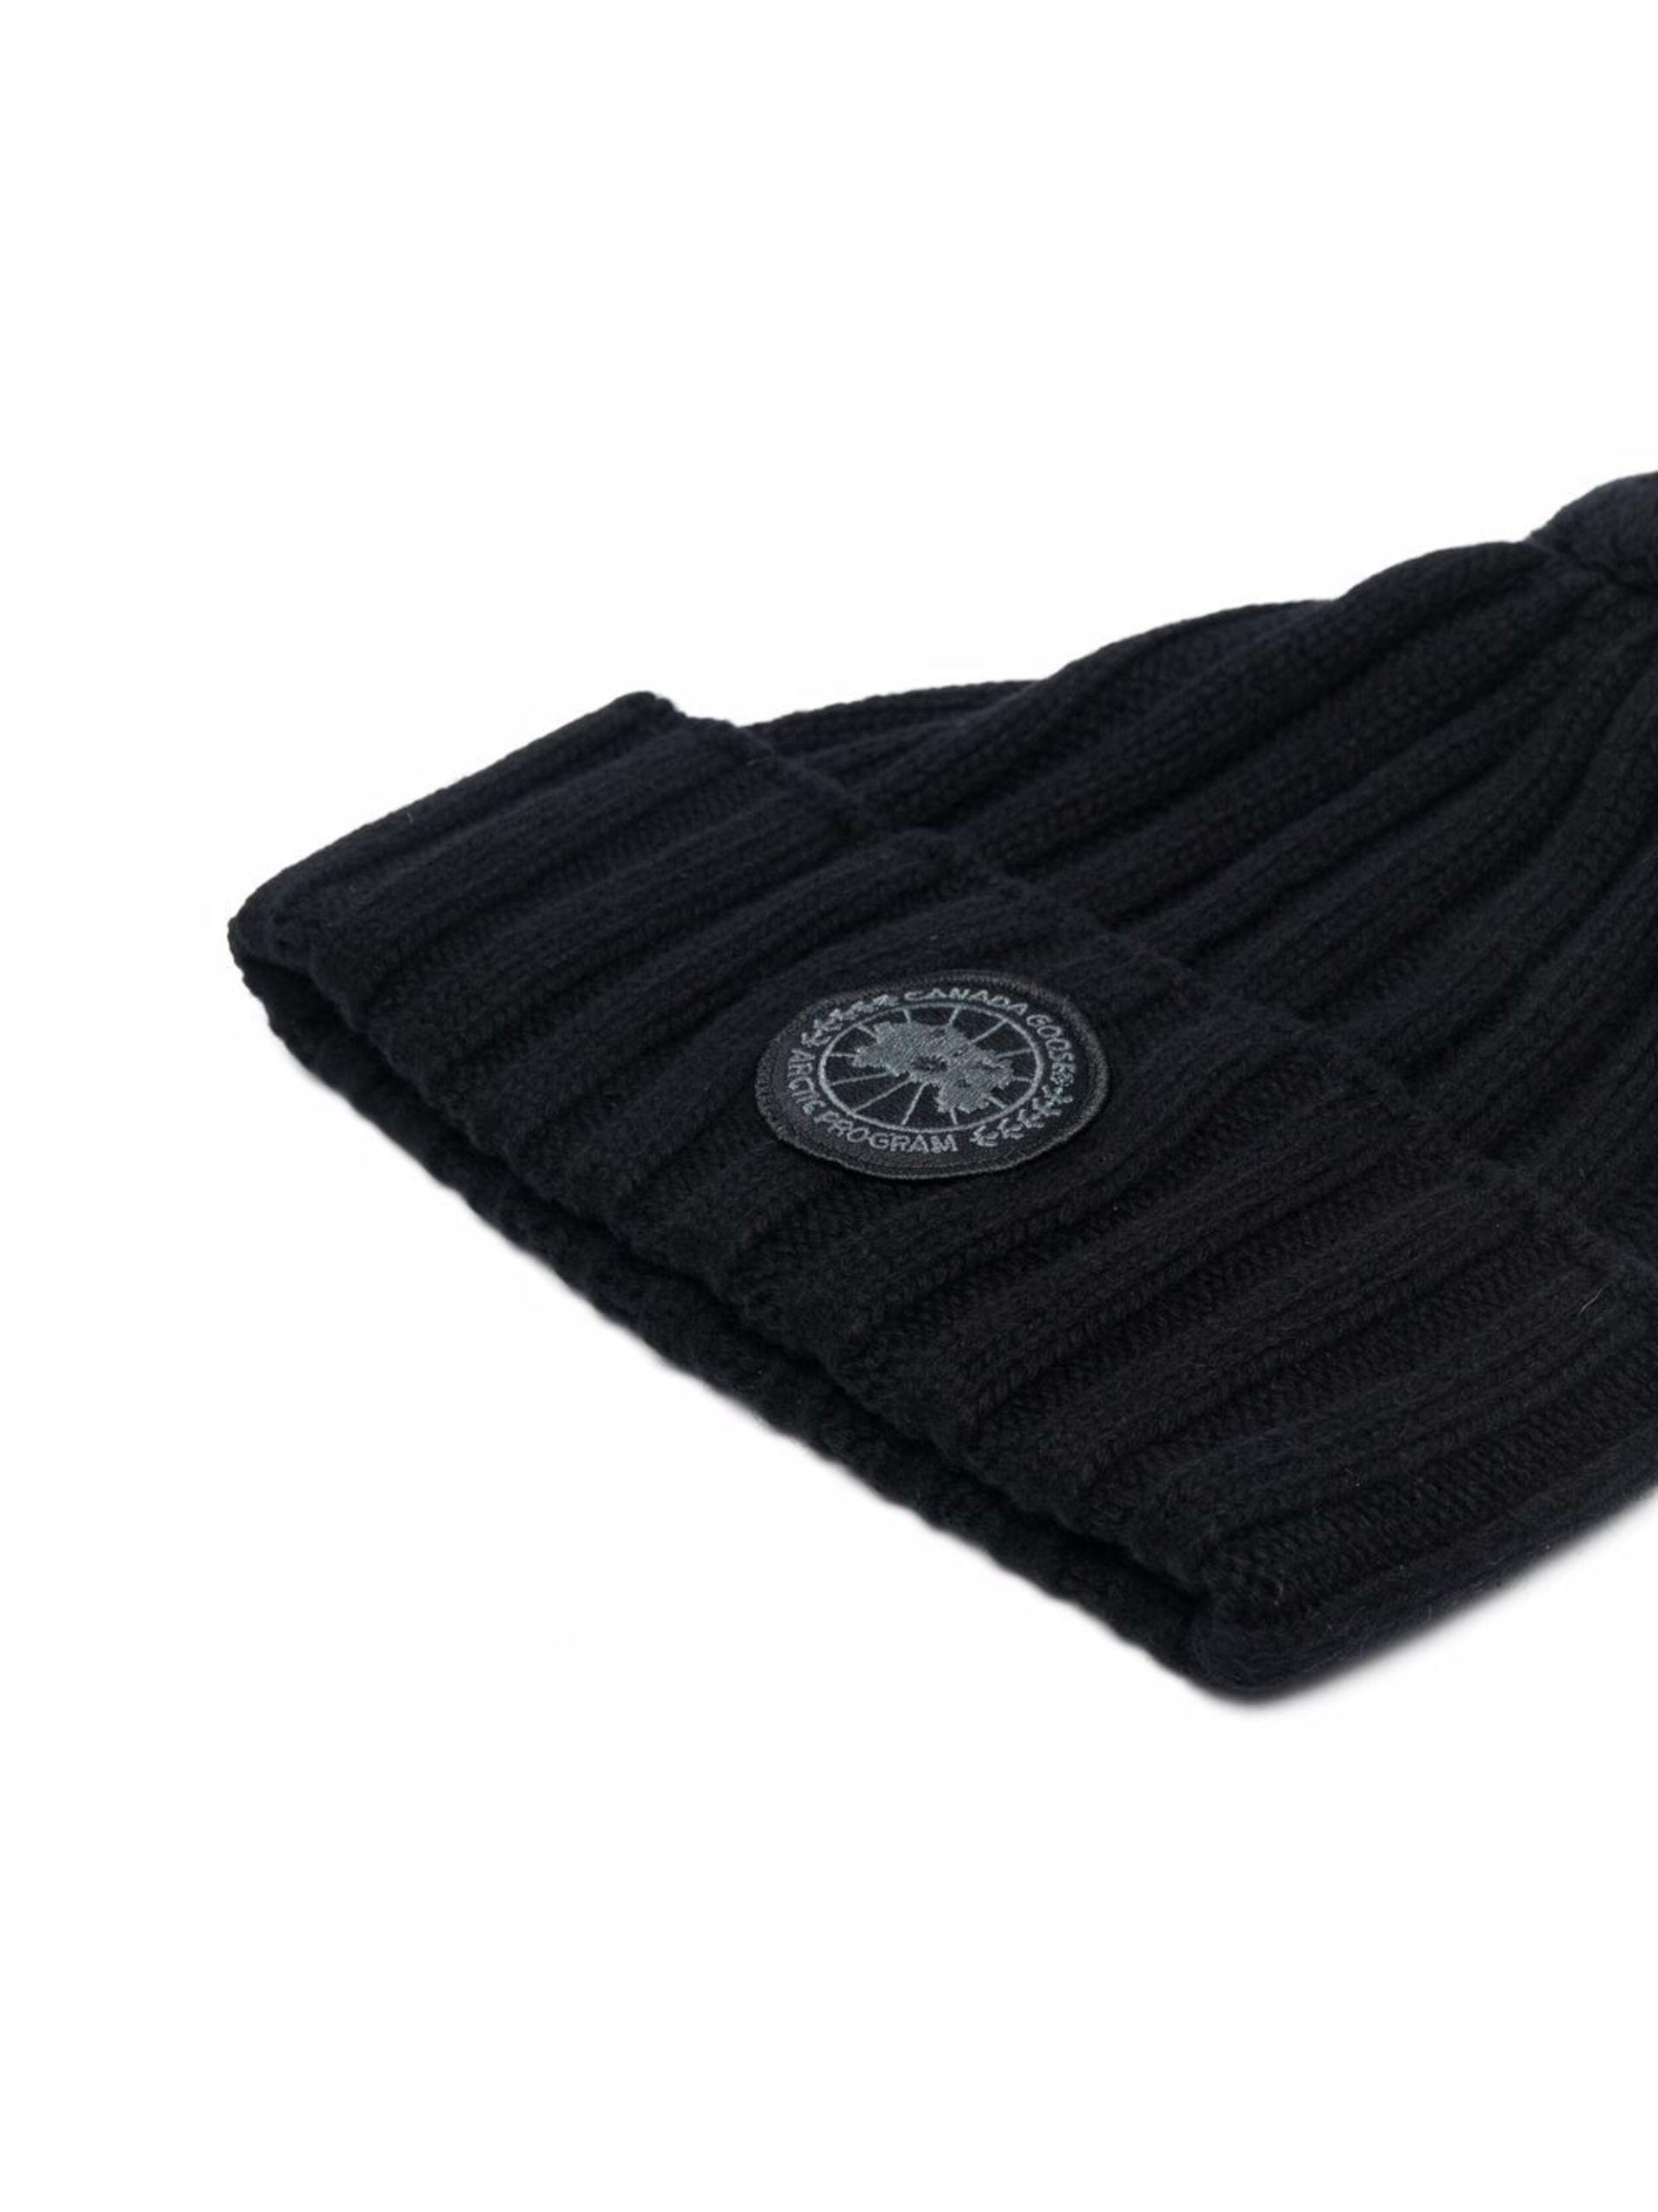 Canada Goose Ribbed Knit Beanie Hat in Black | Lyst